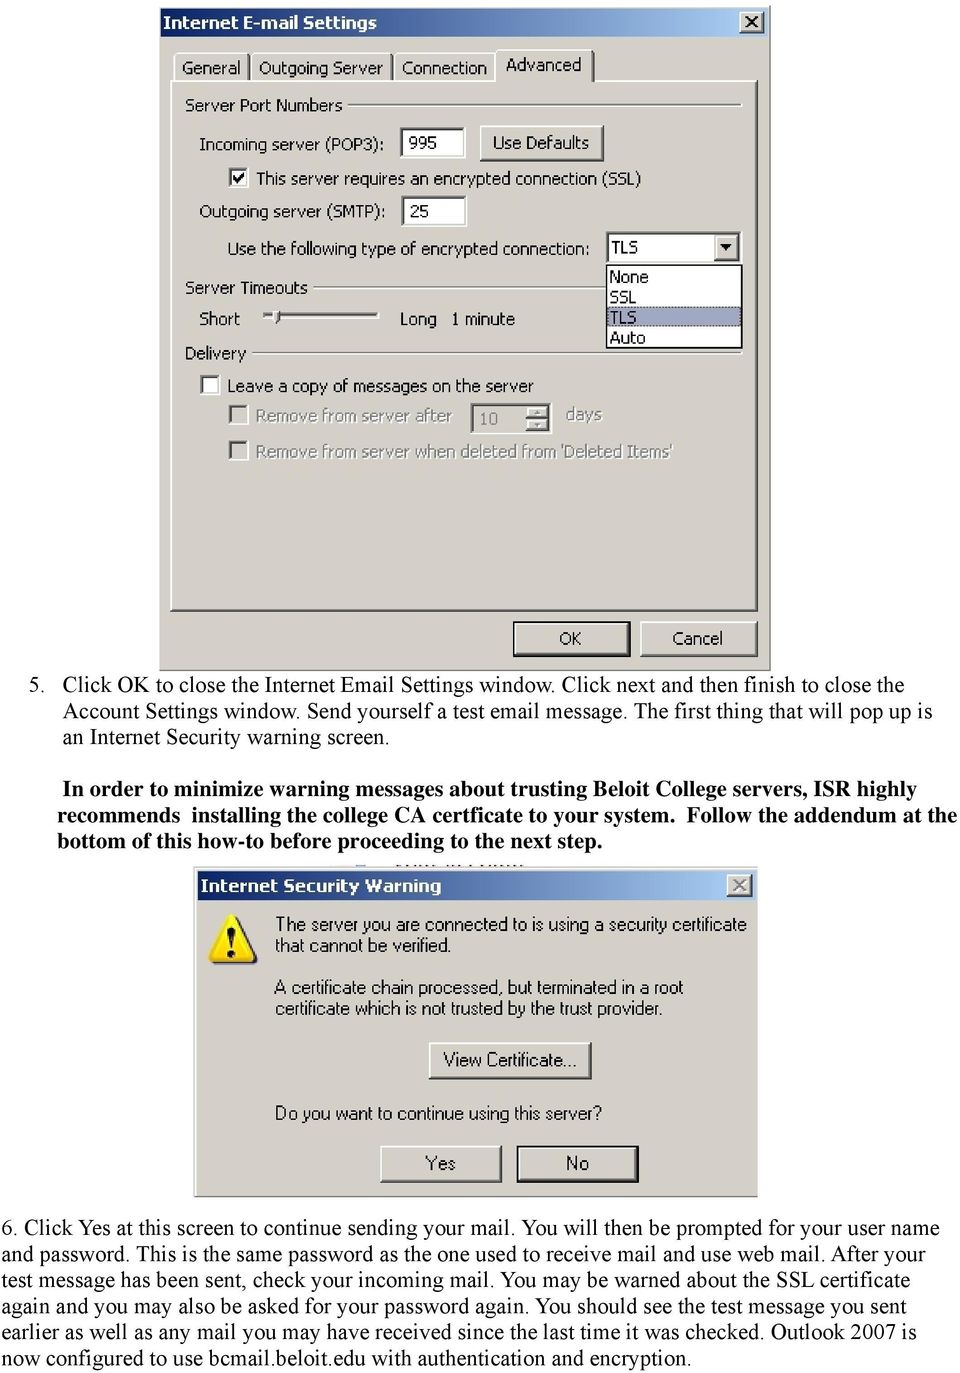 In order to minimize warning messages about trusting Beloit College servers, ISR highly recommends installing the college CA certficate to your system.